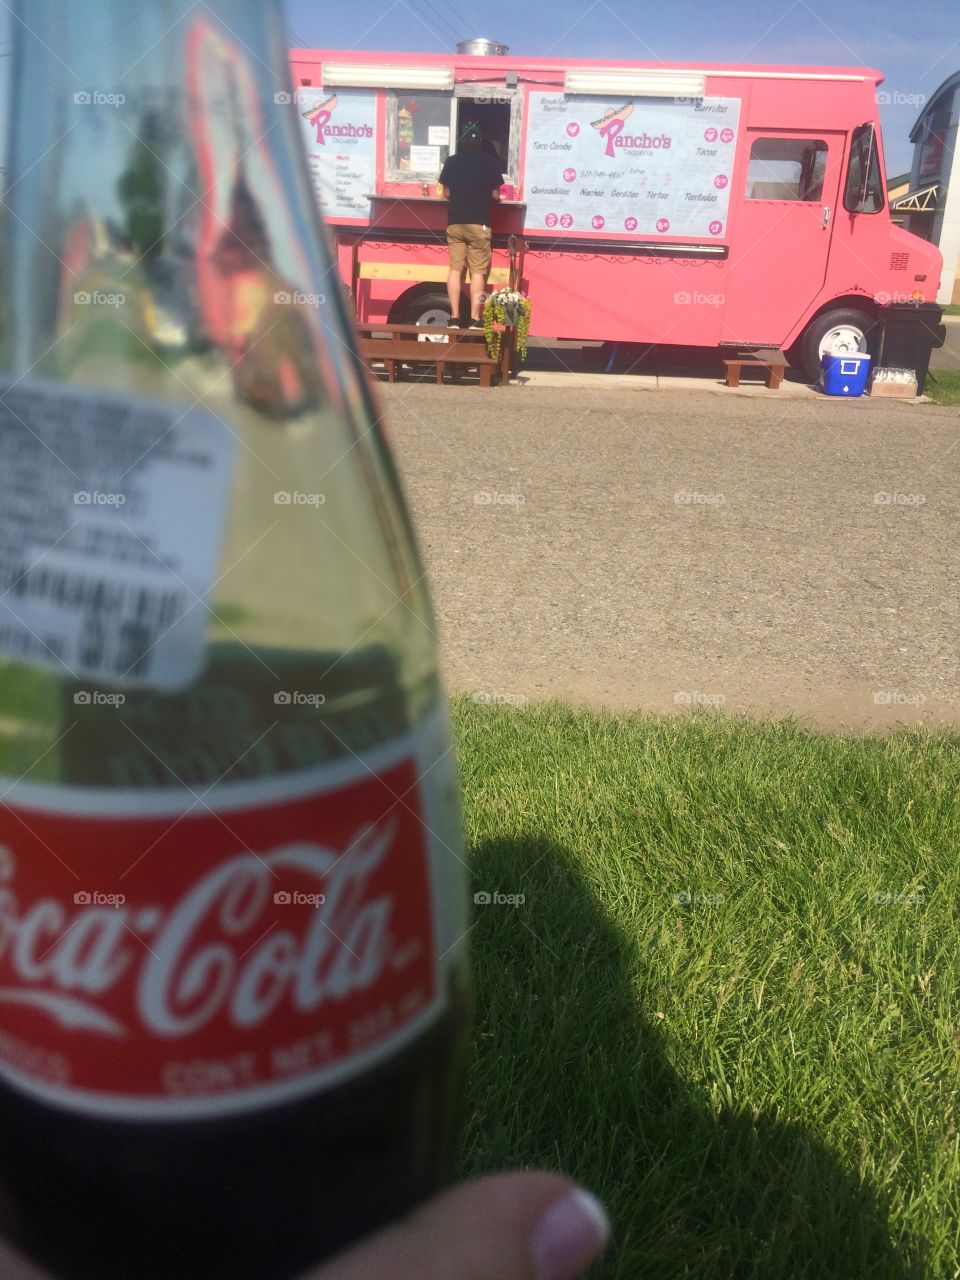 Coca Cola bottle and a food truck